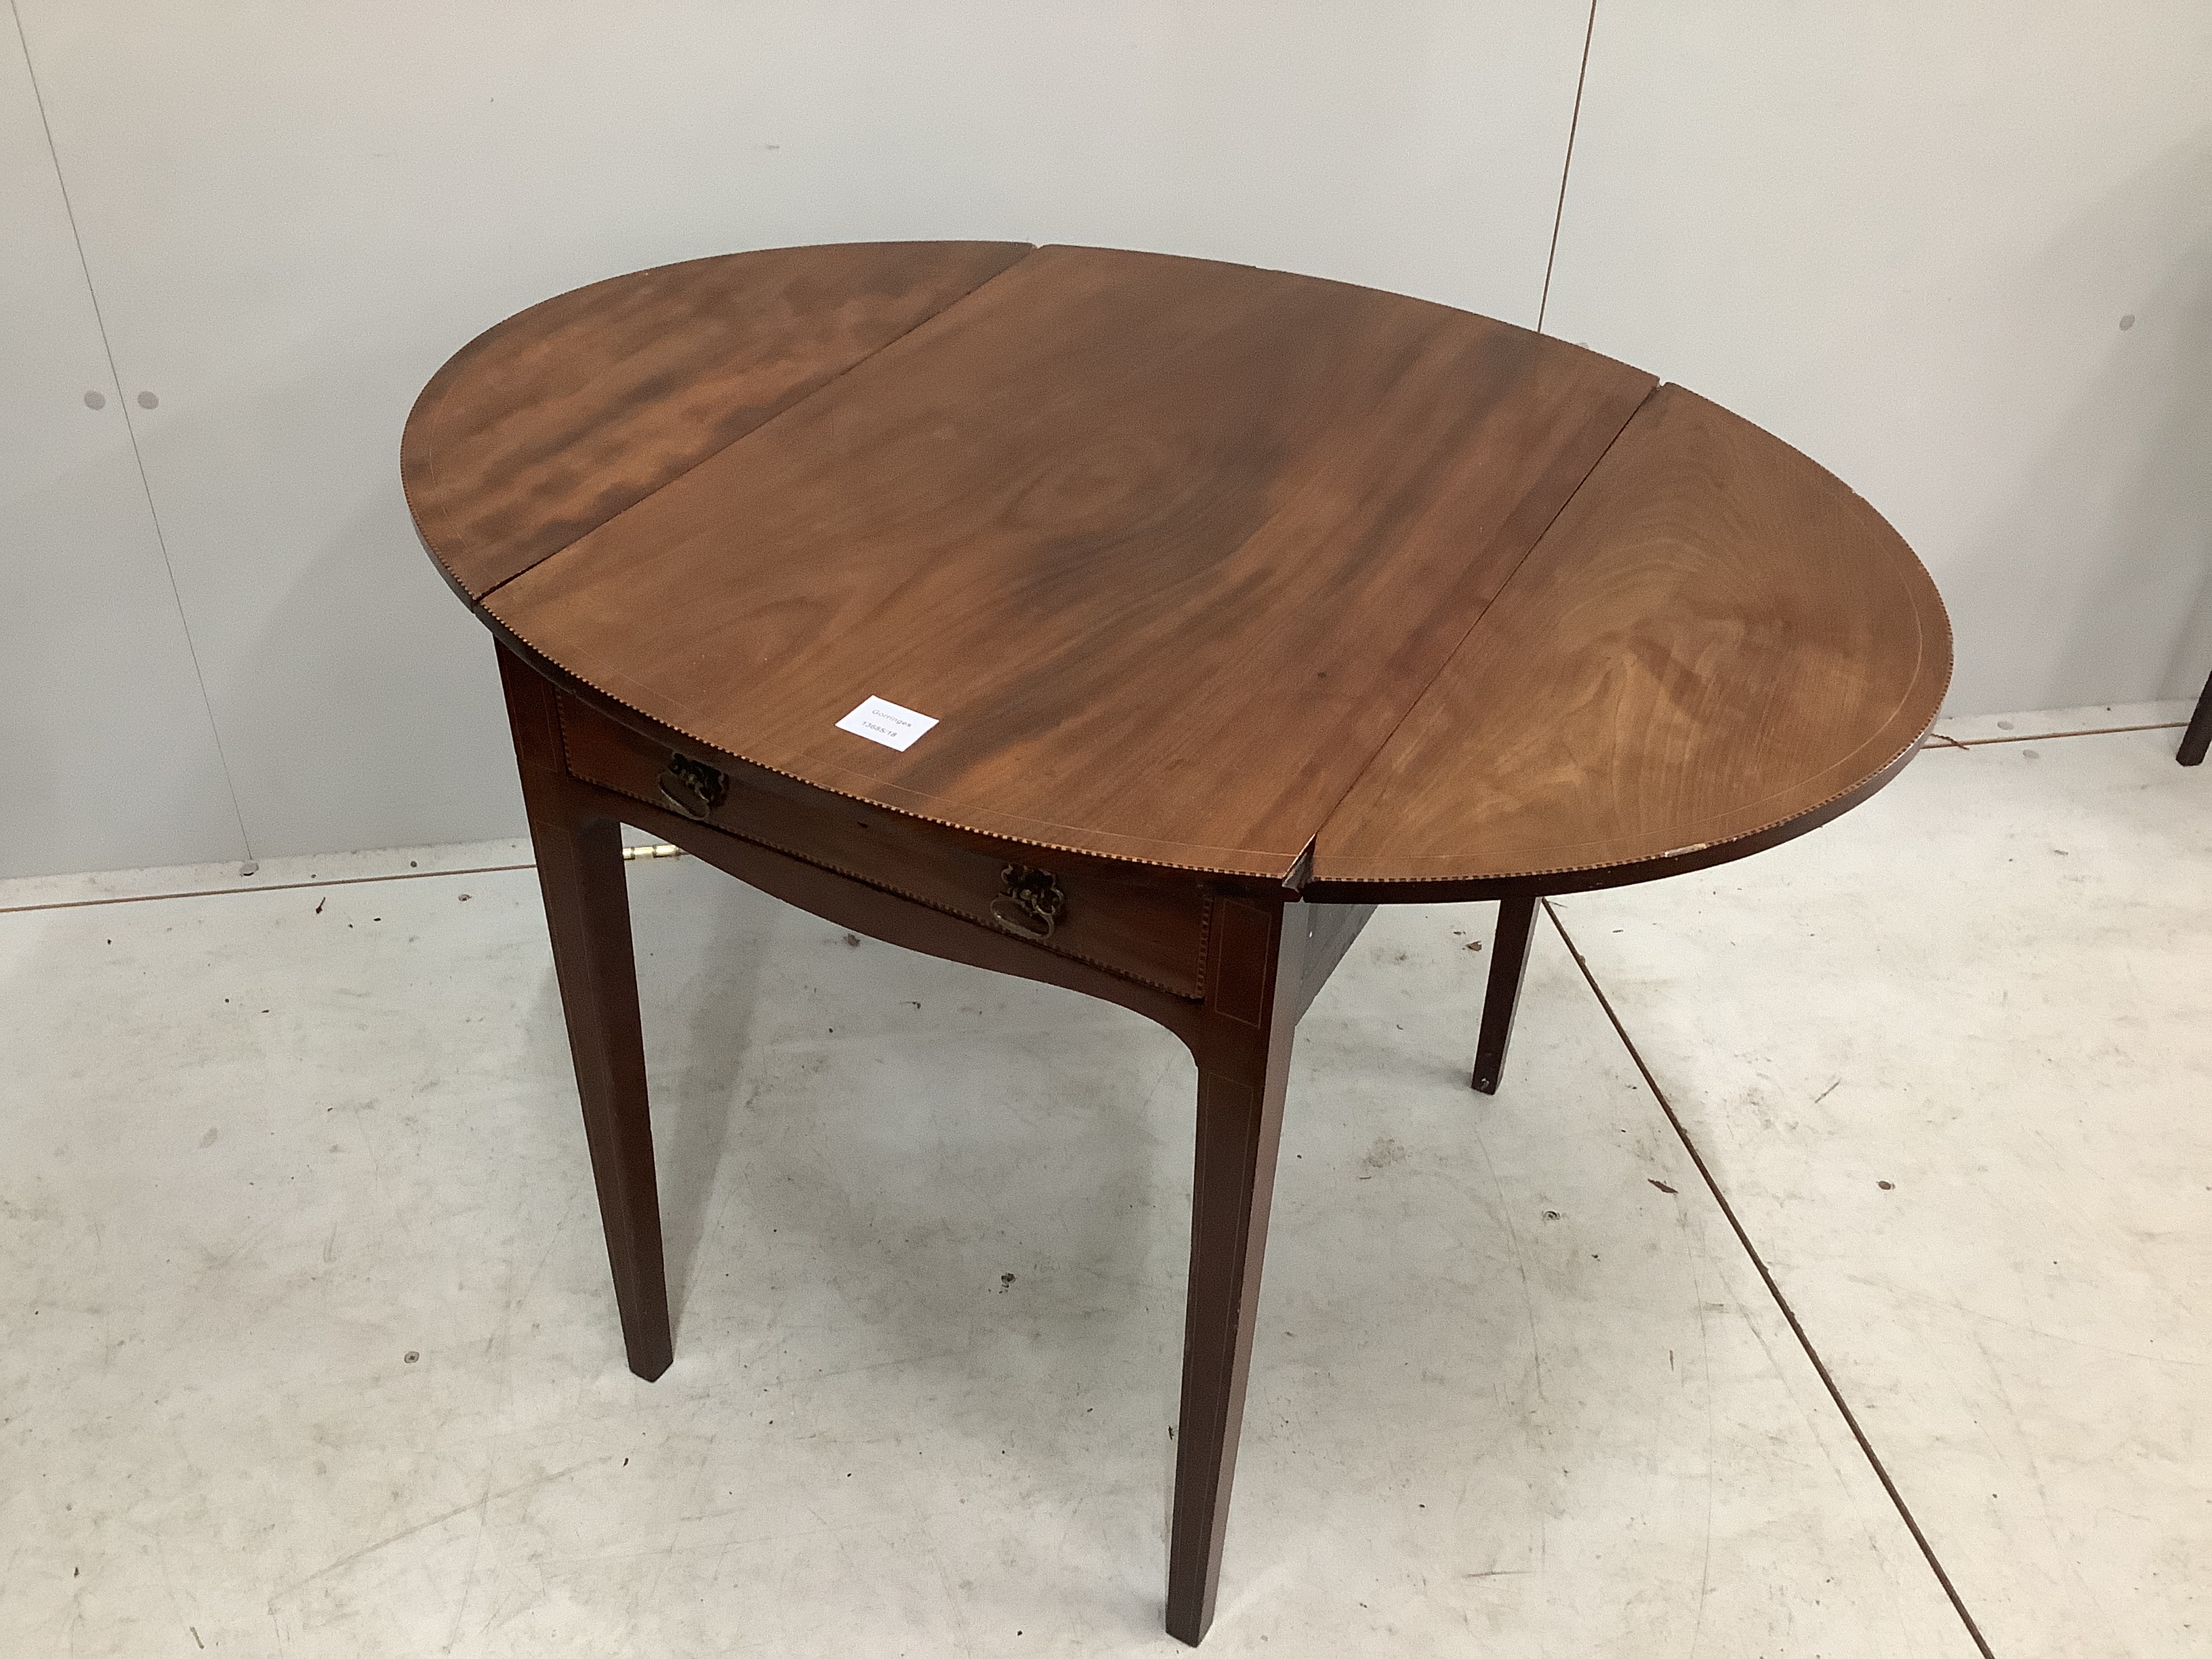 A small George III inlaid mahogany oval Pembroke table, width 71cm, depth 49cm, height 66cm